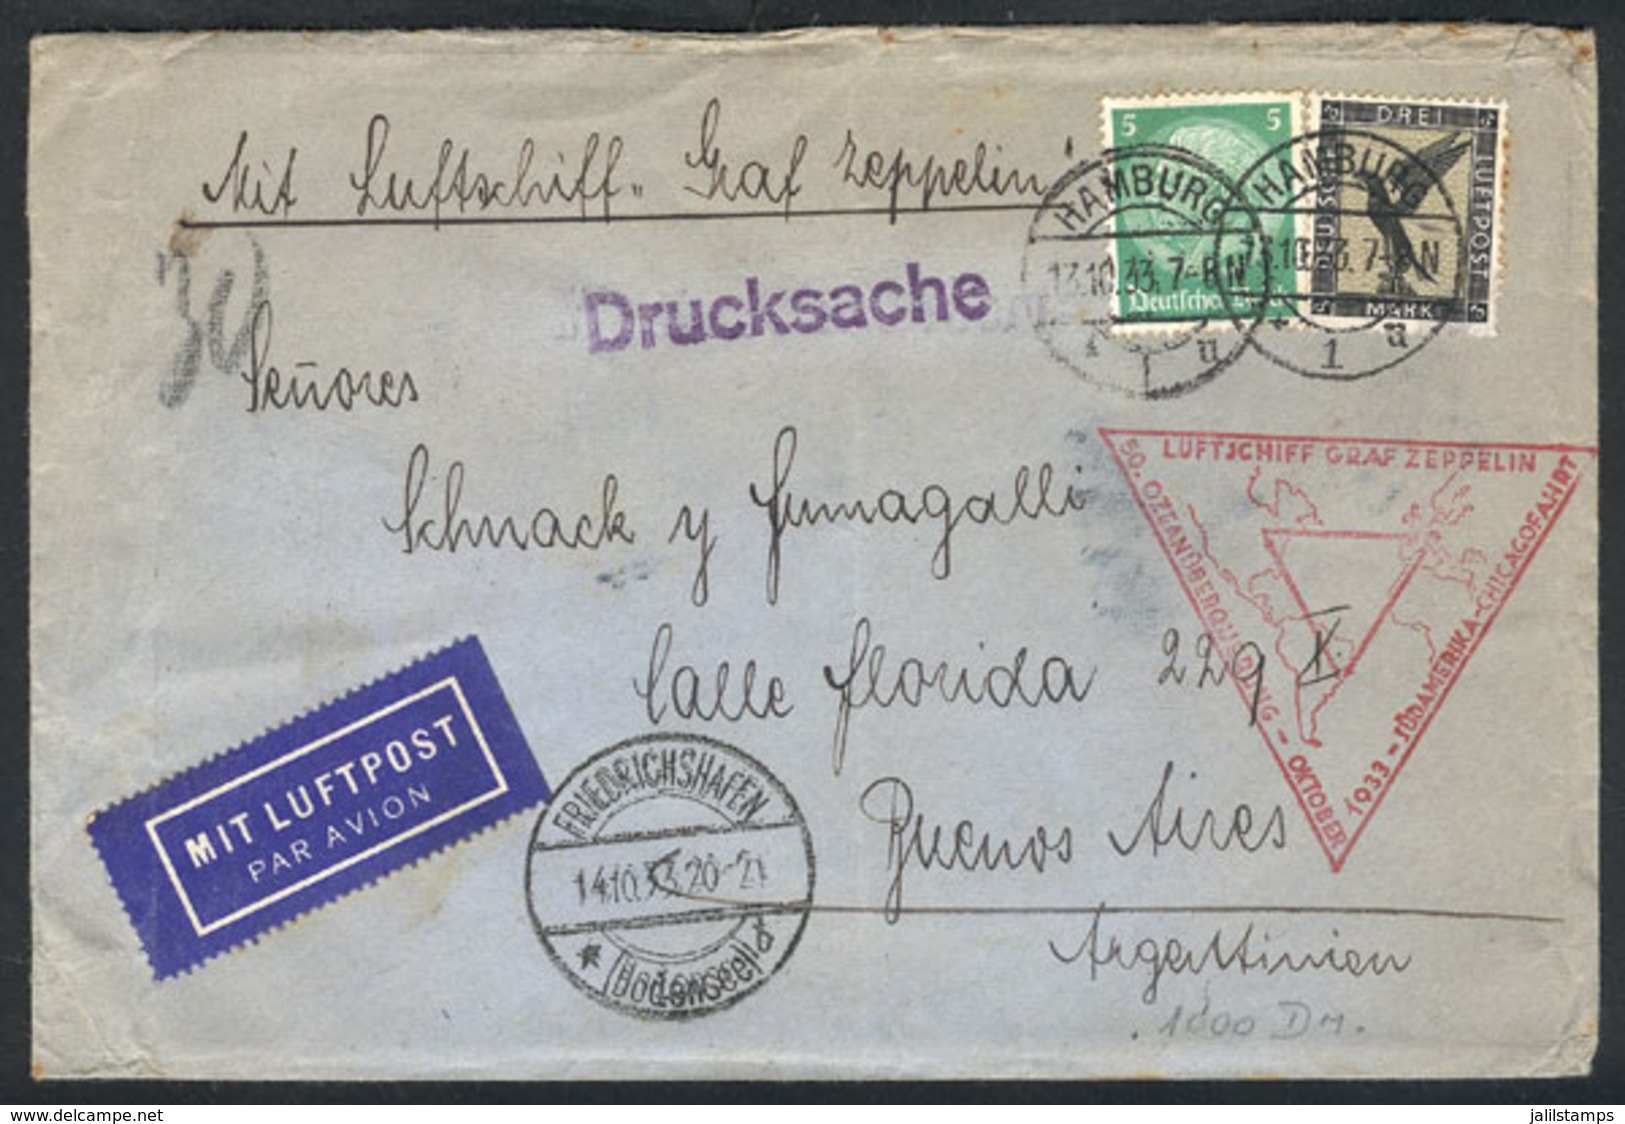 GERMANY: 13/OC/1933 Hamburg - Buenos Aires: Cover With PRINTED MATTER Flown By Zeppelin, Franked With 3.05Mk., With Tria - Préphilatélie